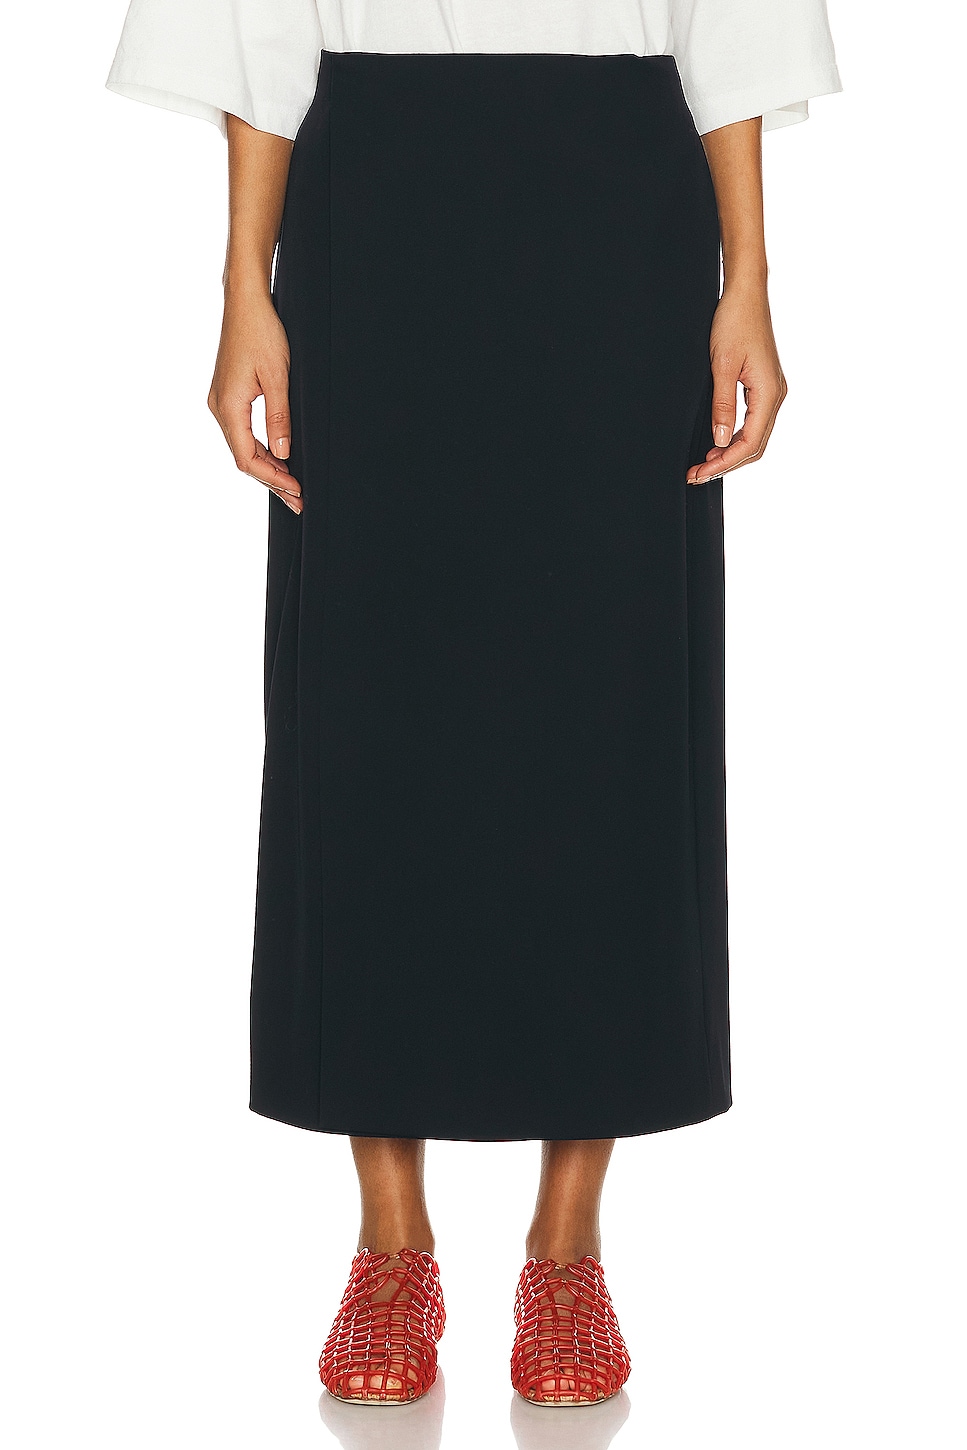 Image 1 of The Row Kavi Skirt in Navy